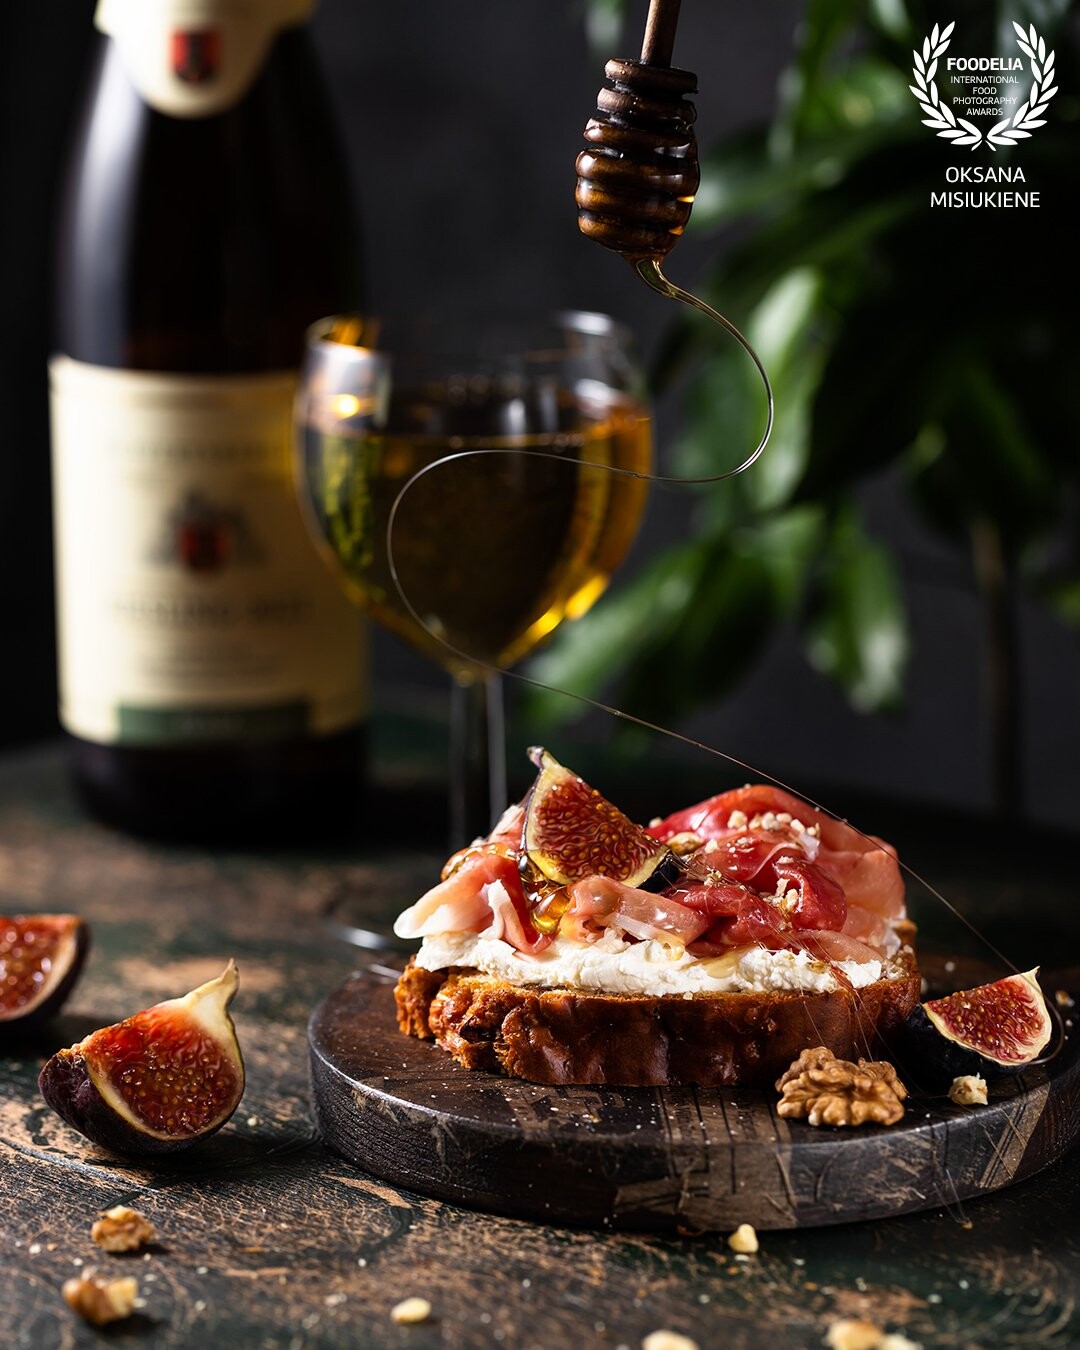 Homemade Bread is one of my favorite foods of all time. There really is nothing quite like a warm slice of fresh bread served with a thick pat of butter on top.  And if homemade bread served with fresh cheese, Serrano ham and figs. The perfect appetizer with wine.